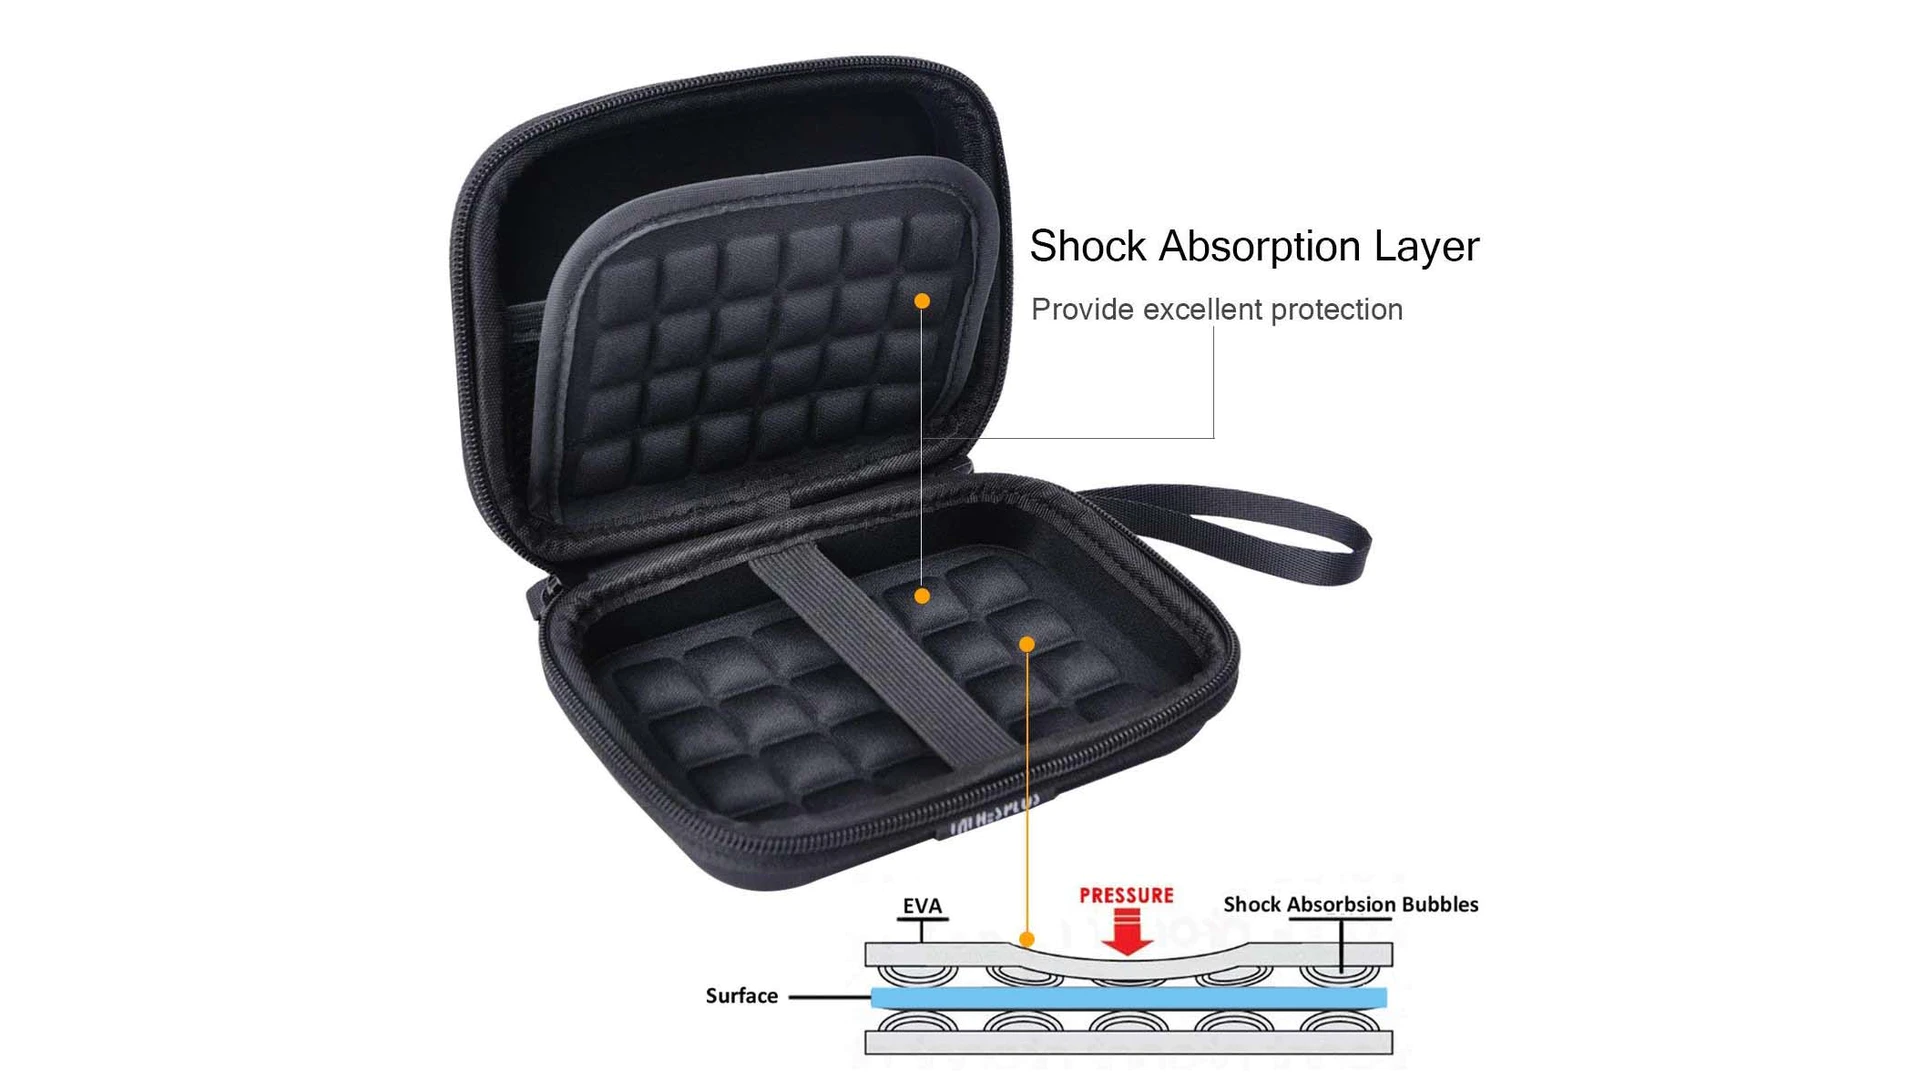 portable eva travel case with strap for brushes